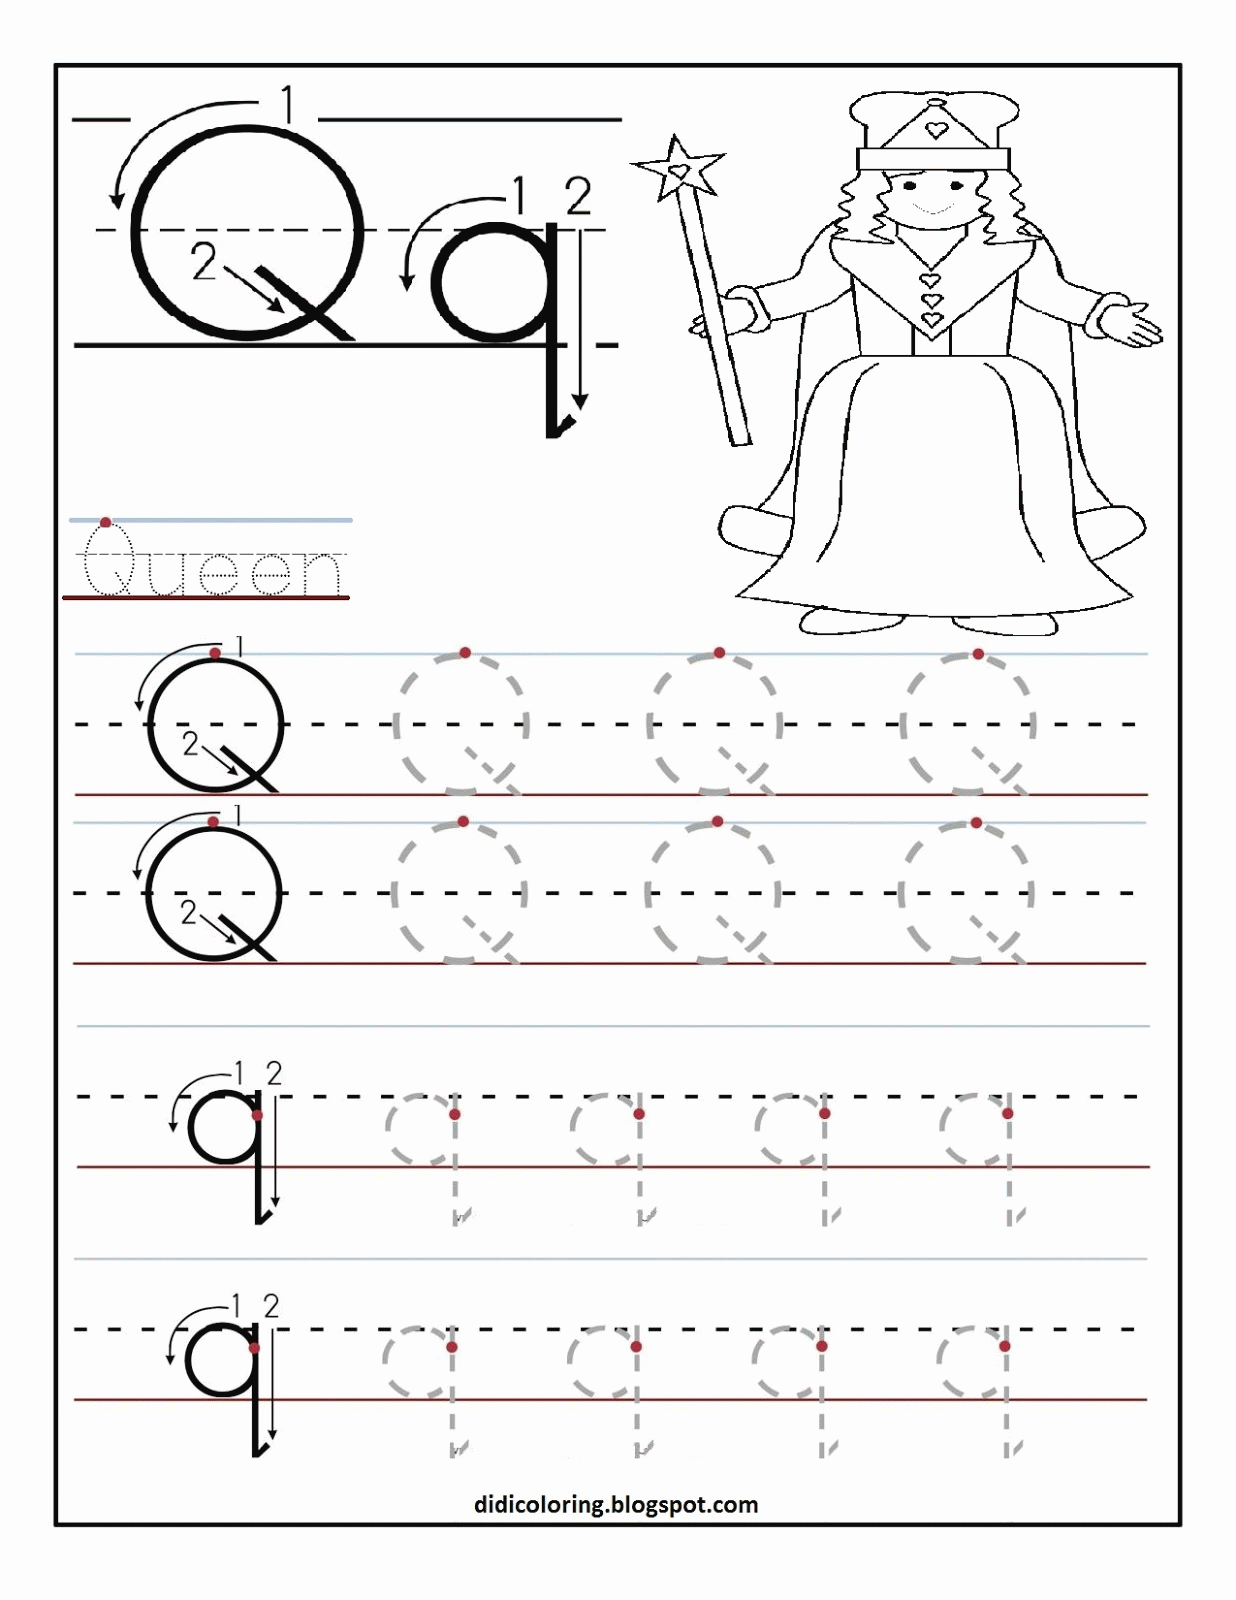 Free printable worksheet letter Q for your child to learn and ...